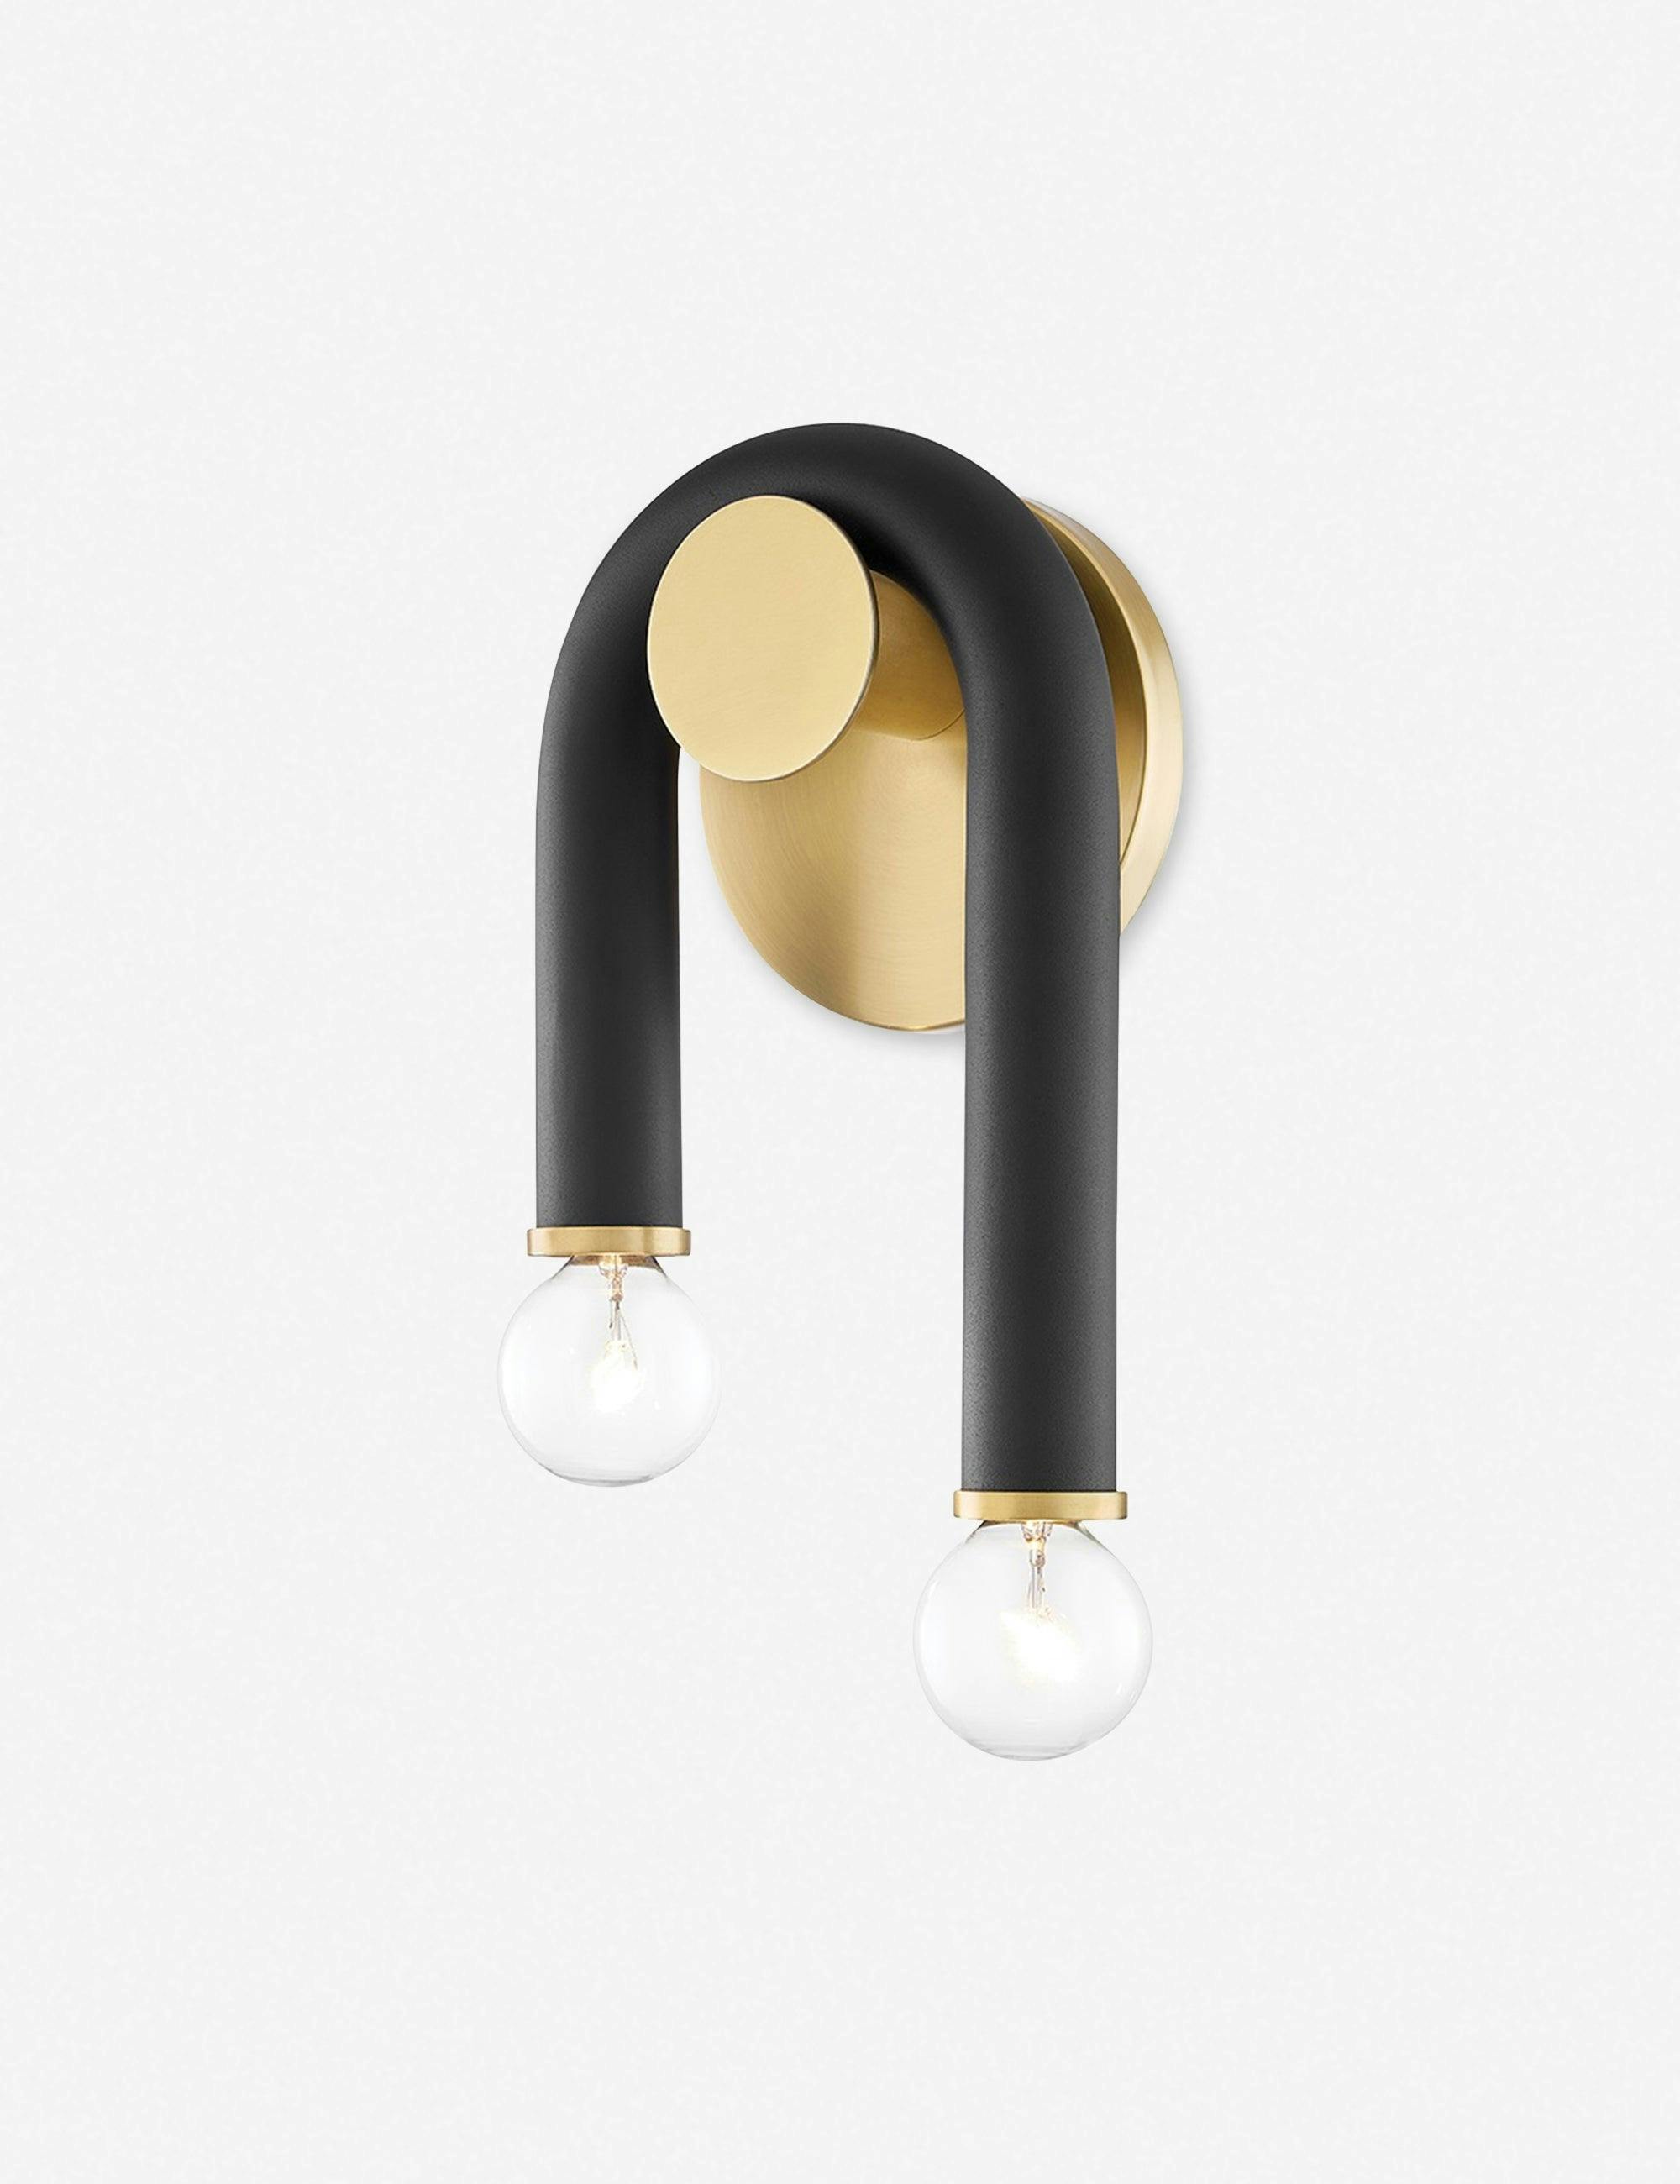 Whimsical Modern Black and Brass Dual-Bulb Wall Sconce